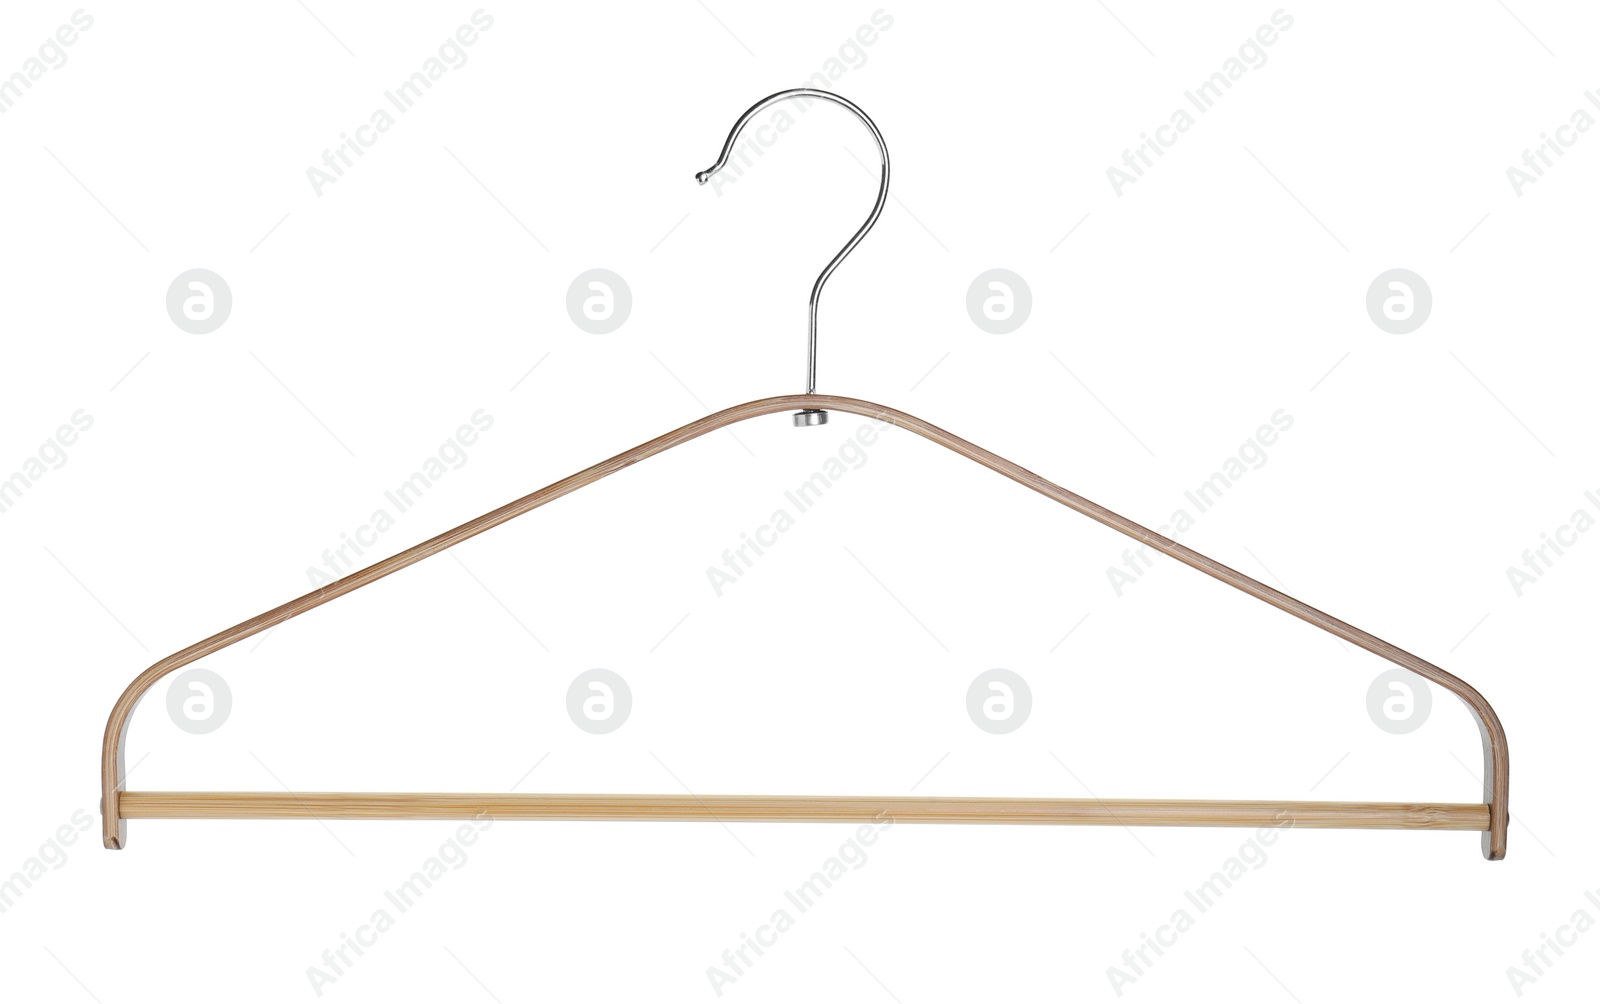 Photo of One empty wooden hanger isolated on white